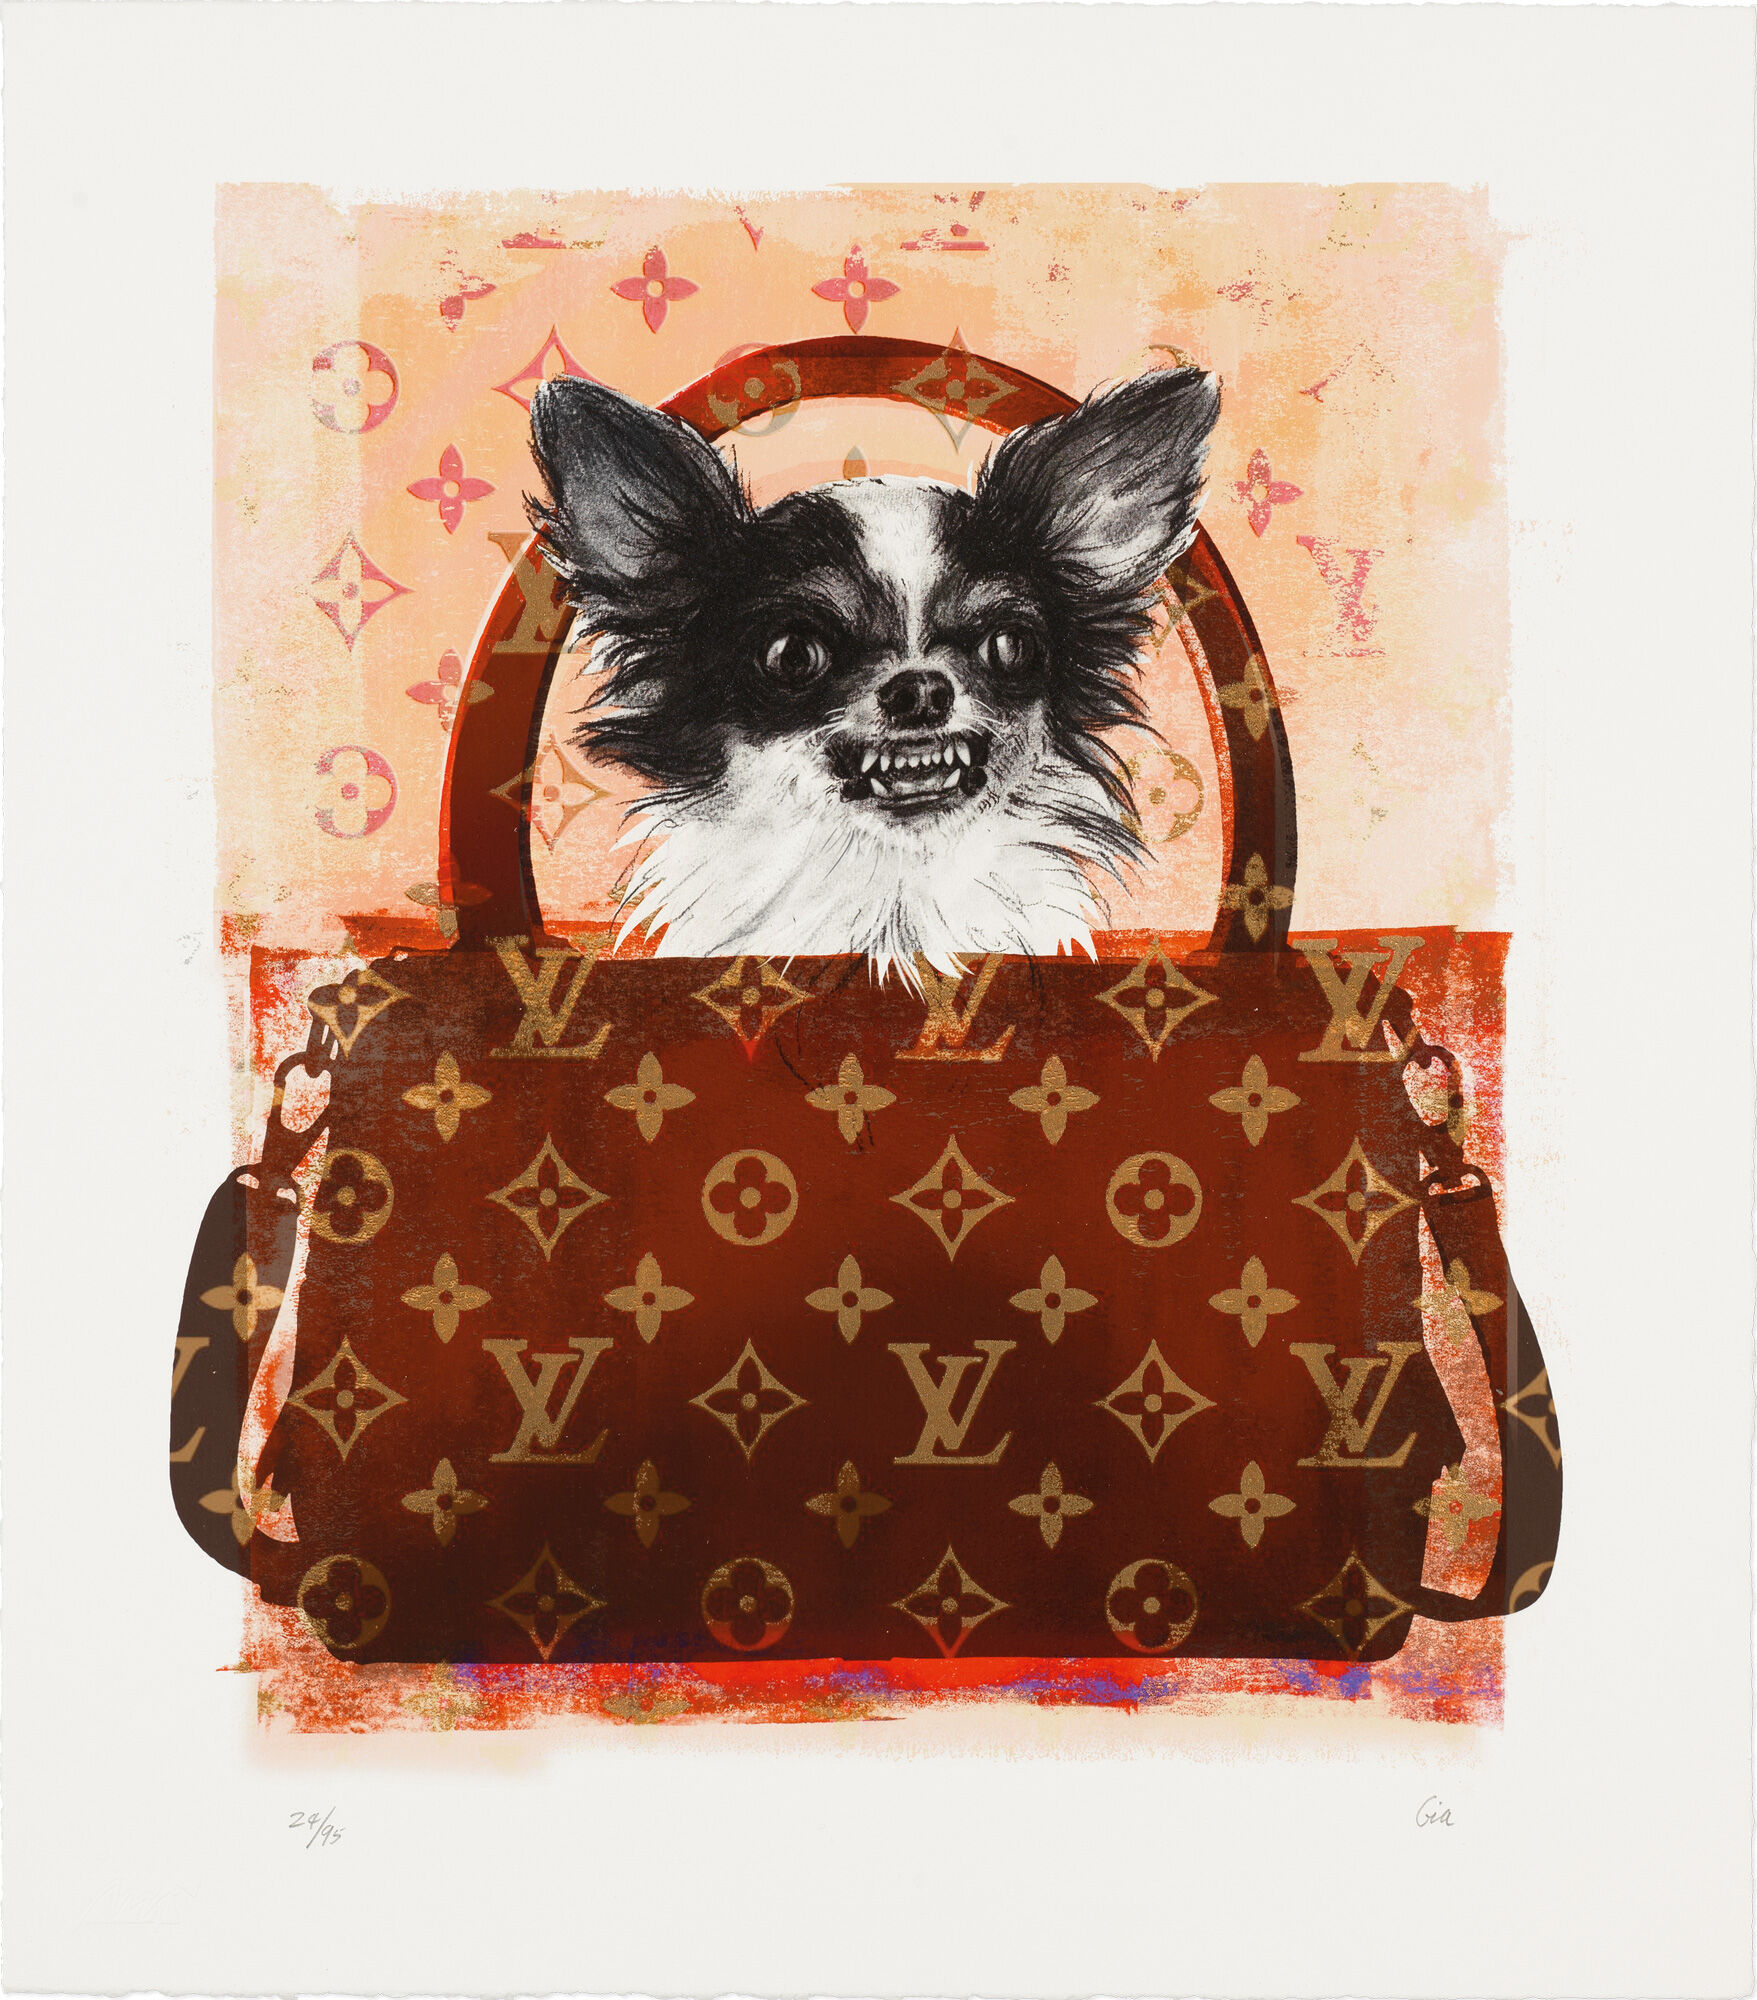 Picture "Louis Vitton Dog" (2014) by Shannan Gia